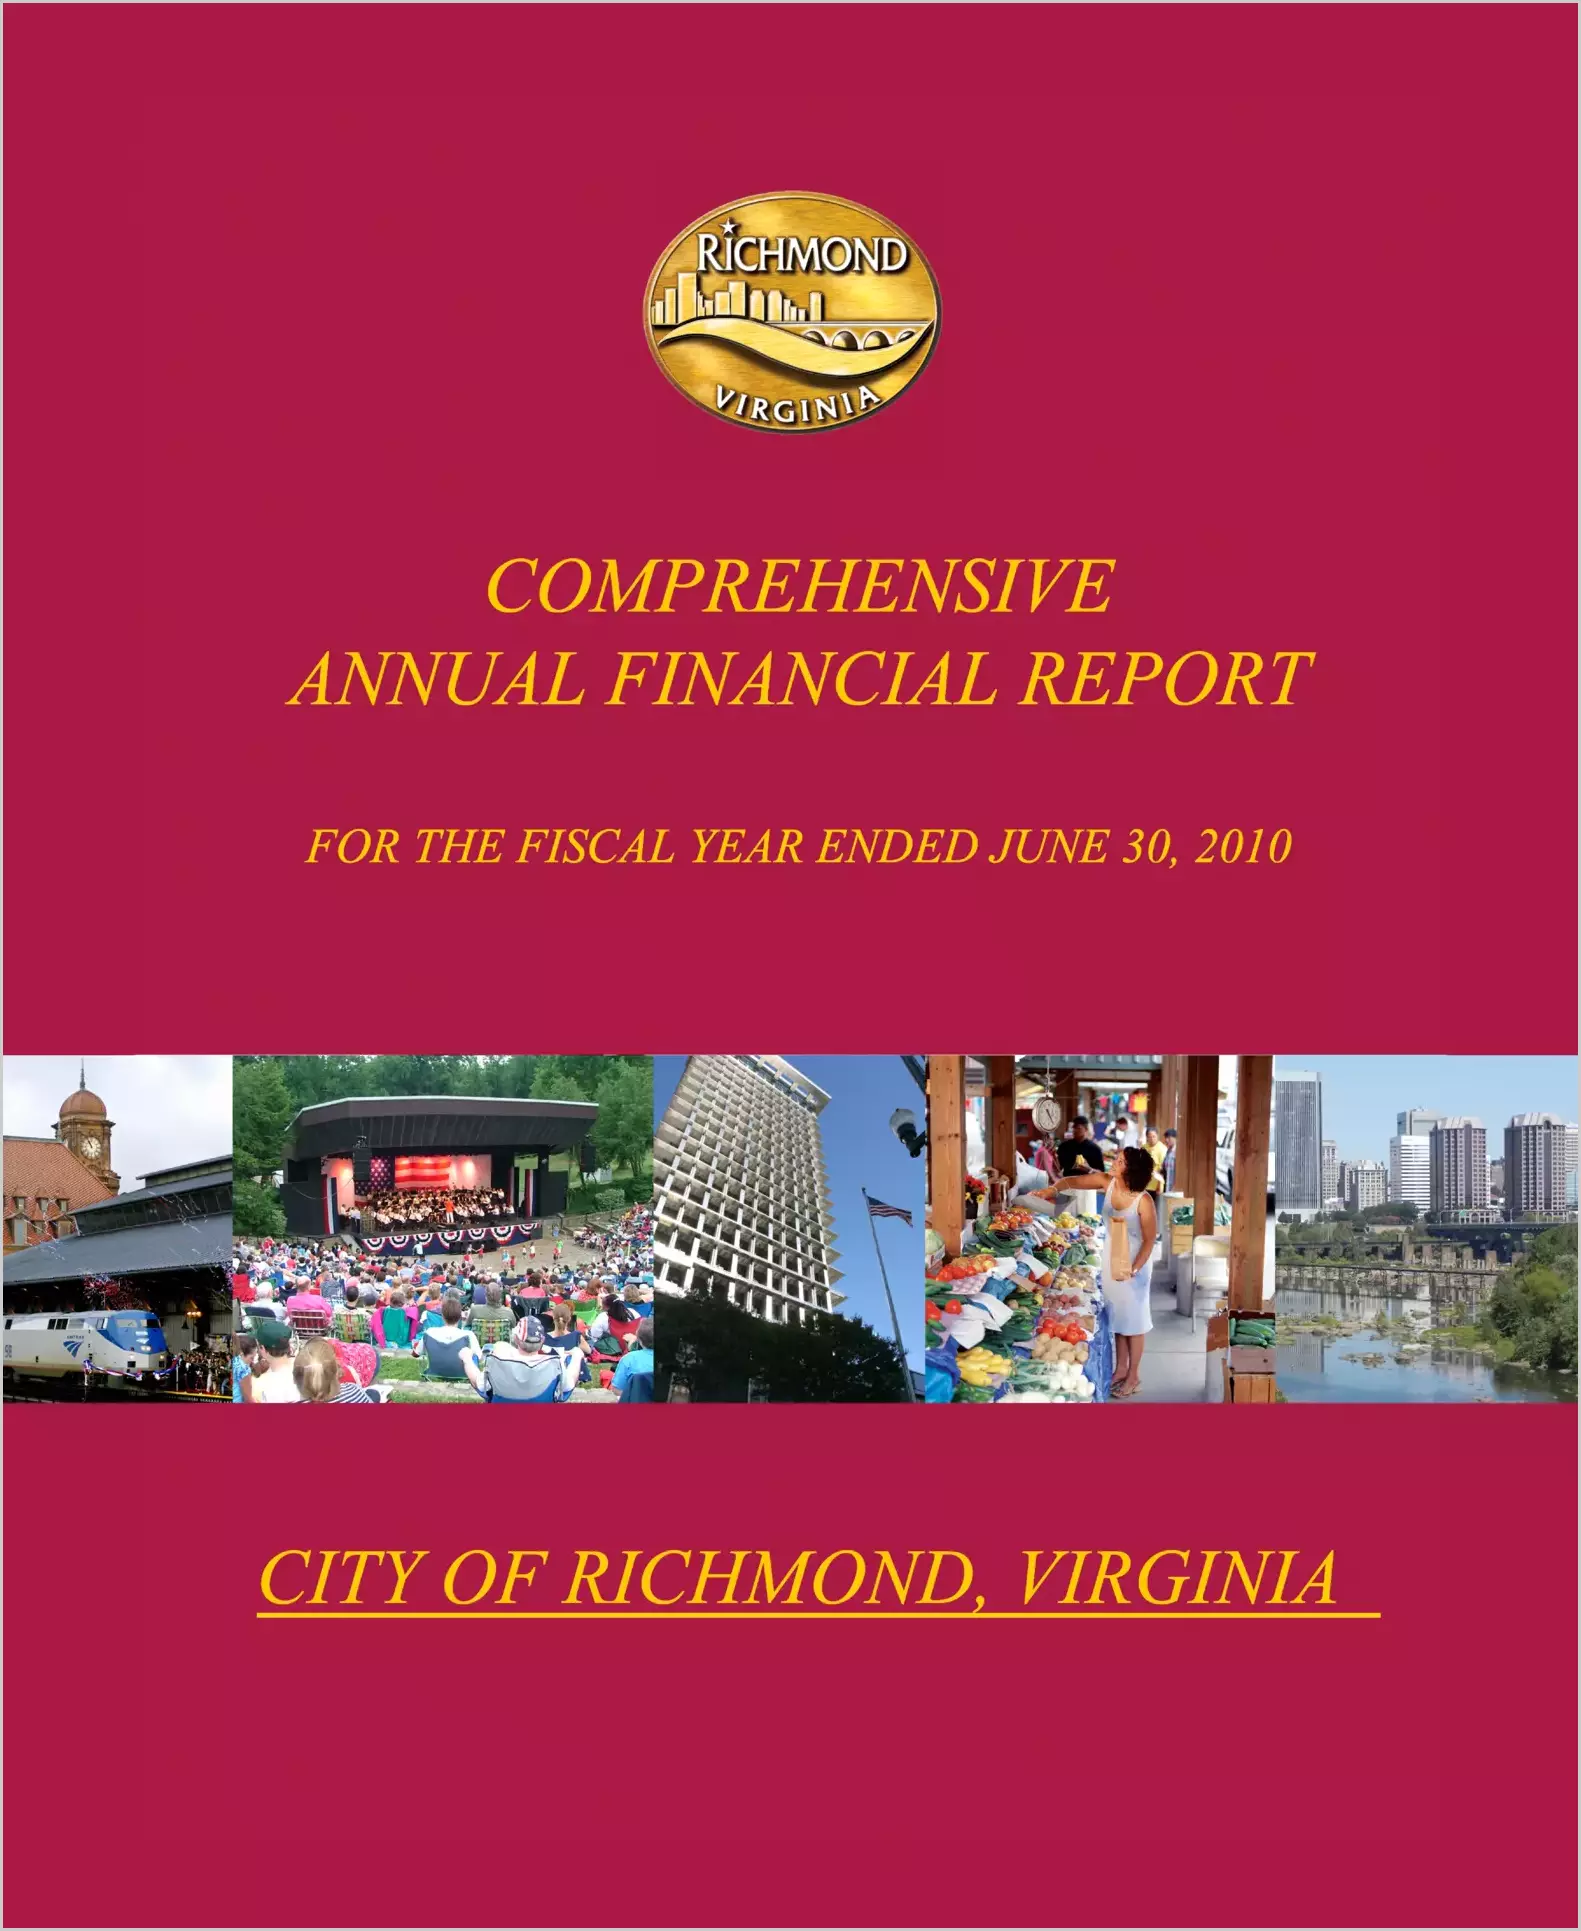 2010 Annual Financial Report for City of Richmond